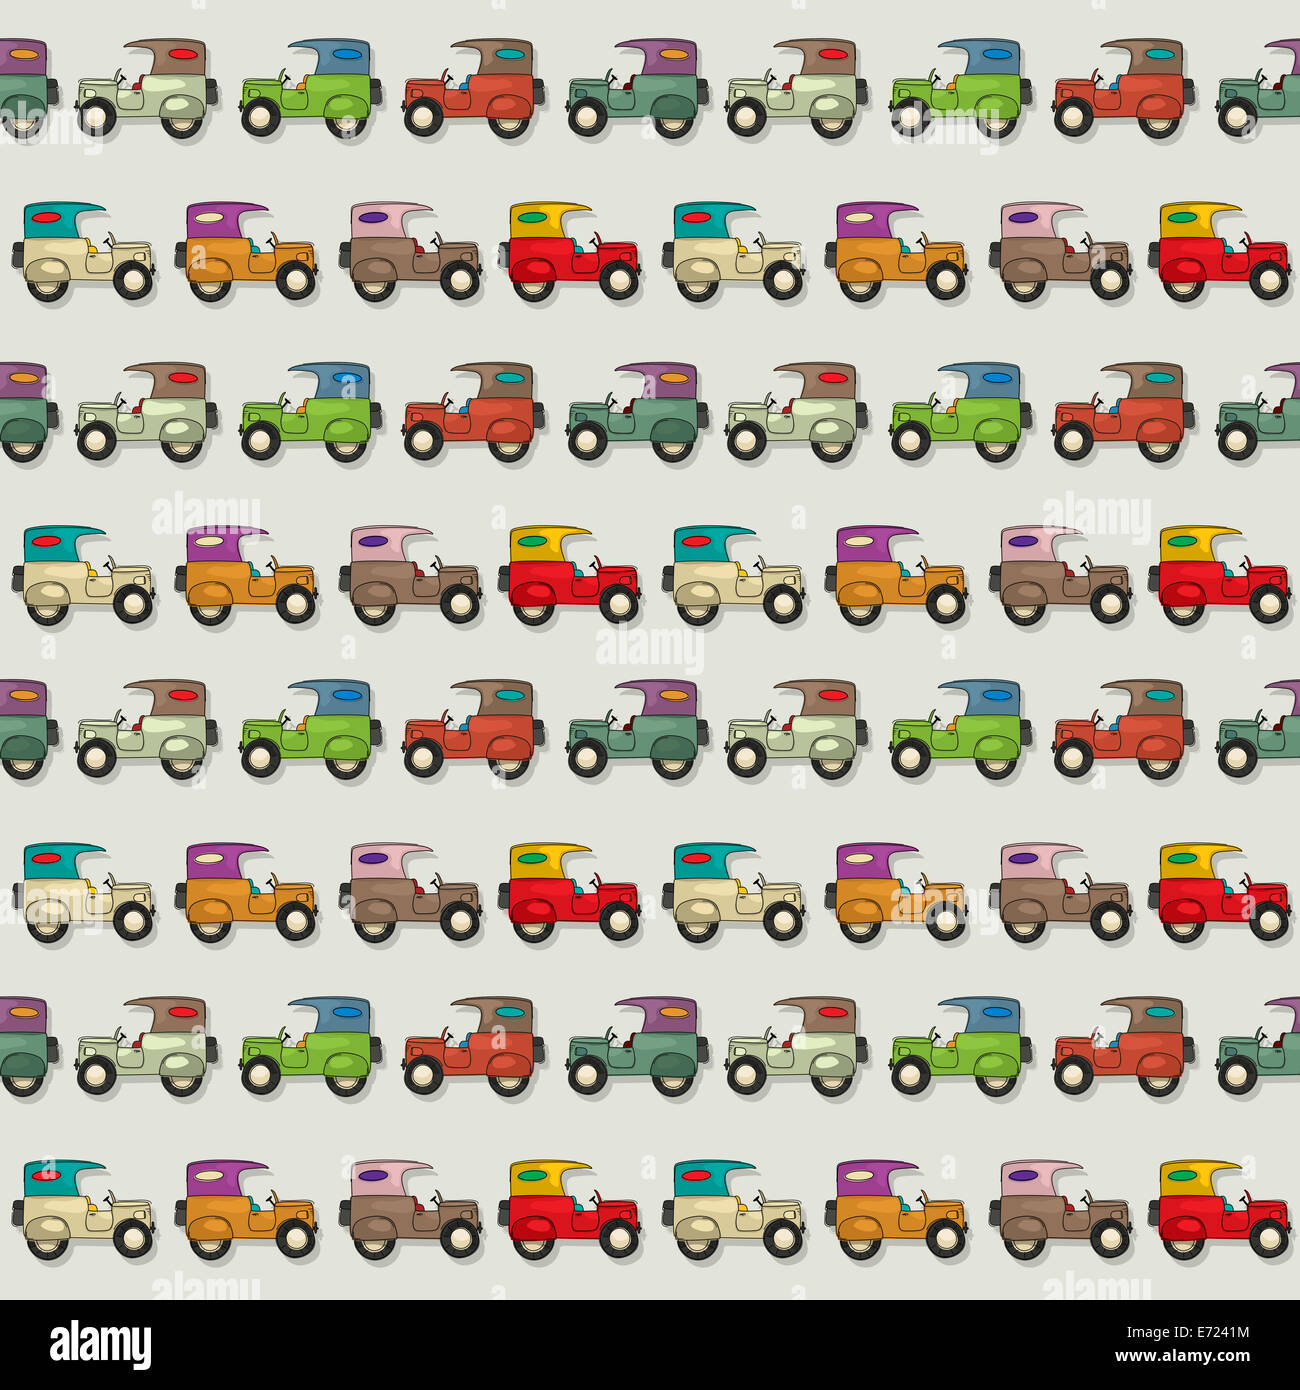 Seamless wallpaper pattern with cartoon cars Stock Photo